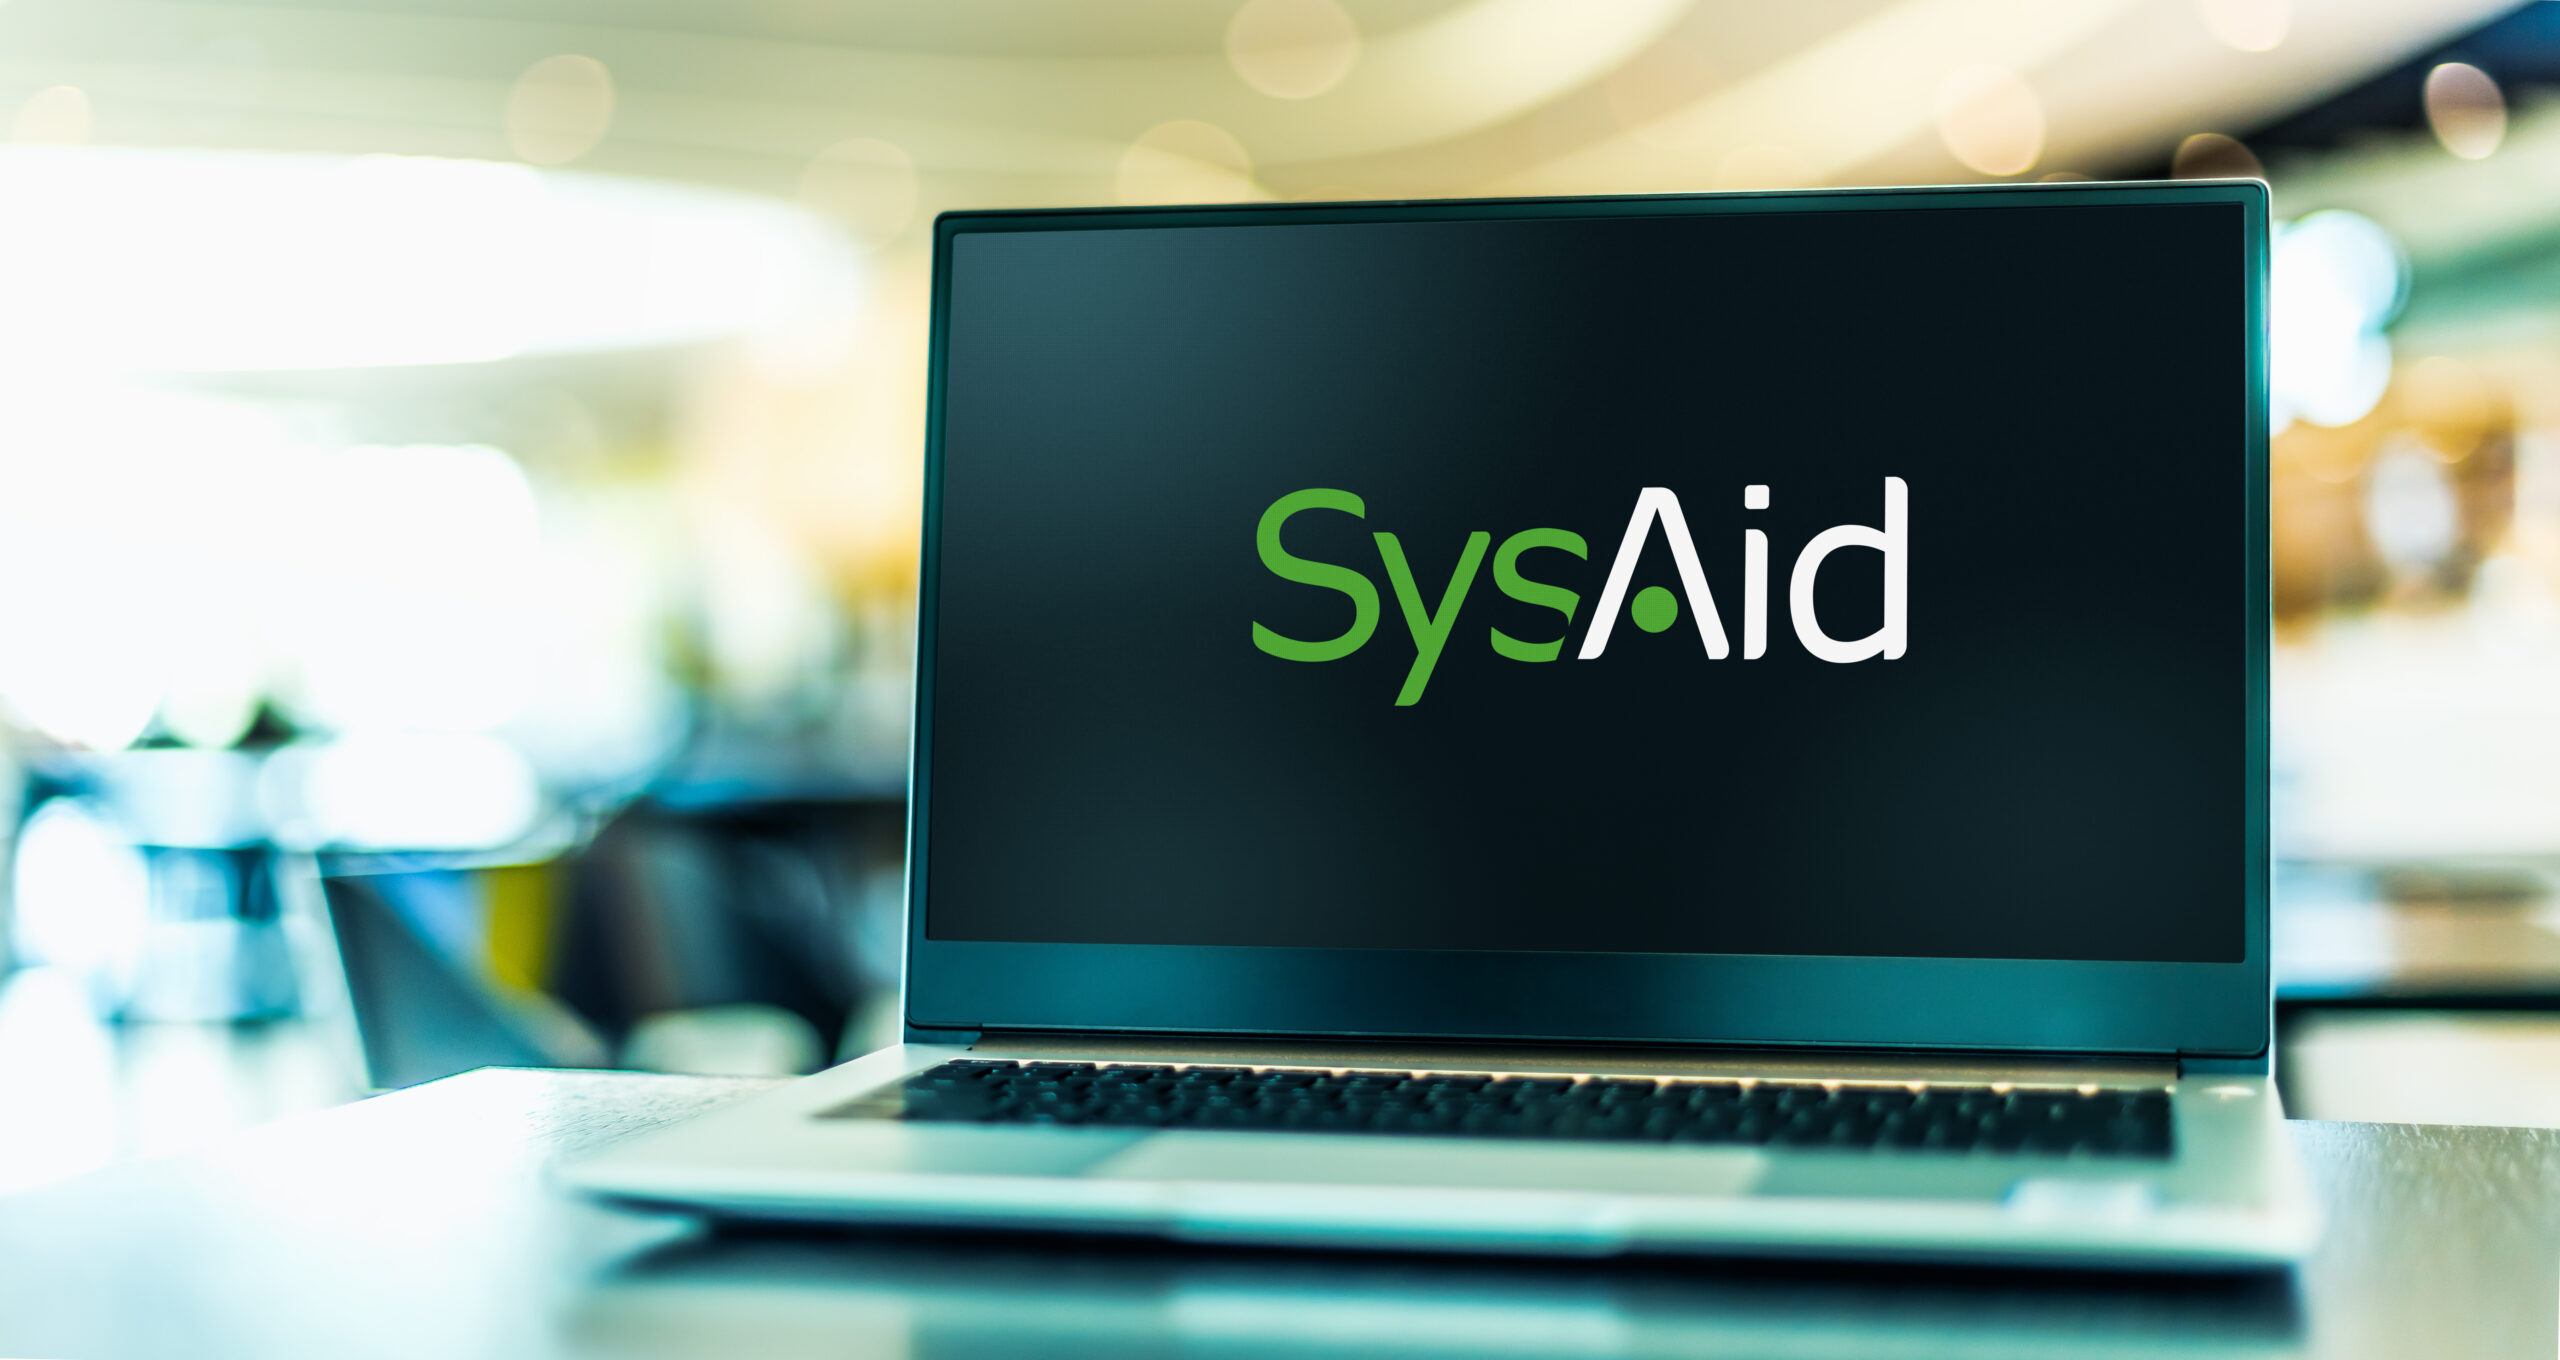 sysaid-zero-day-vulnerability-exploited-by-ransomware-group